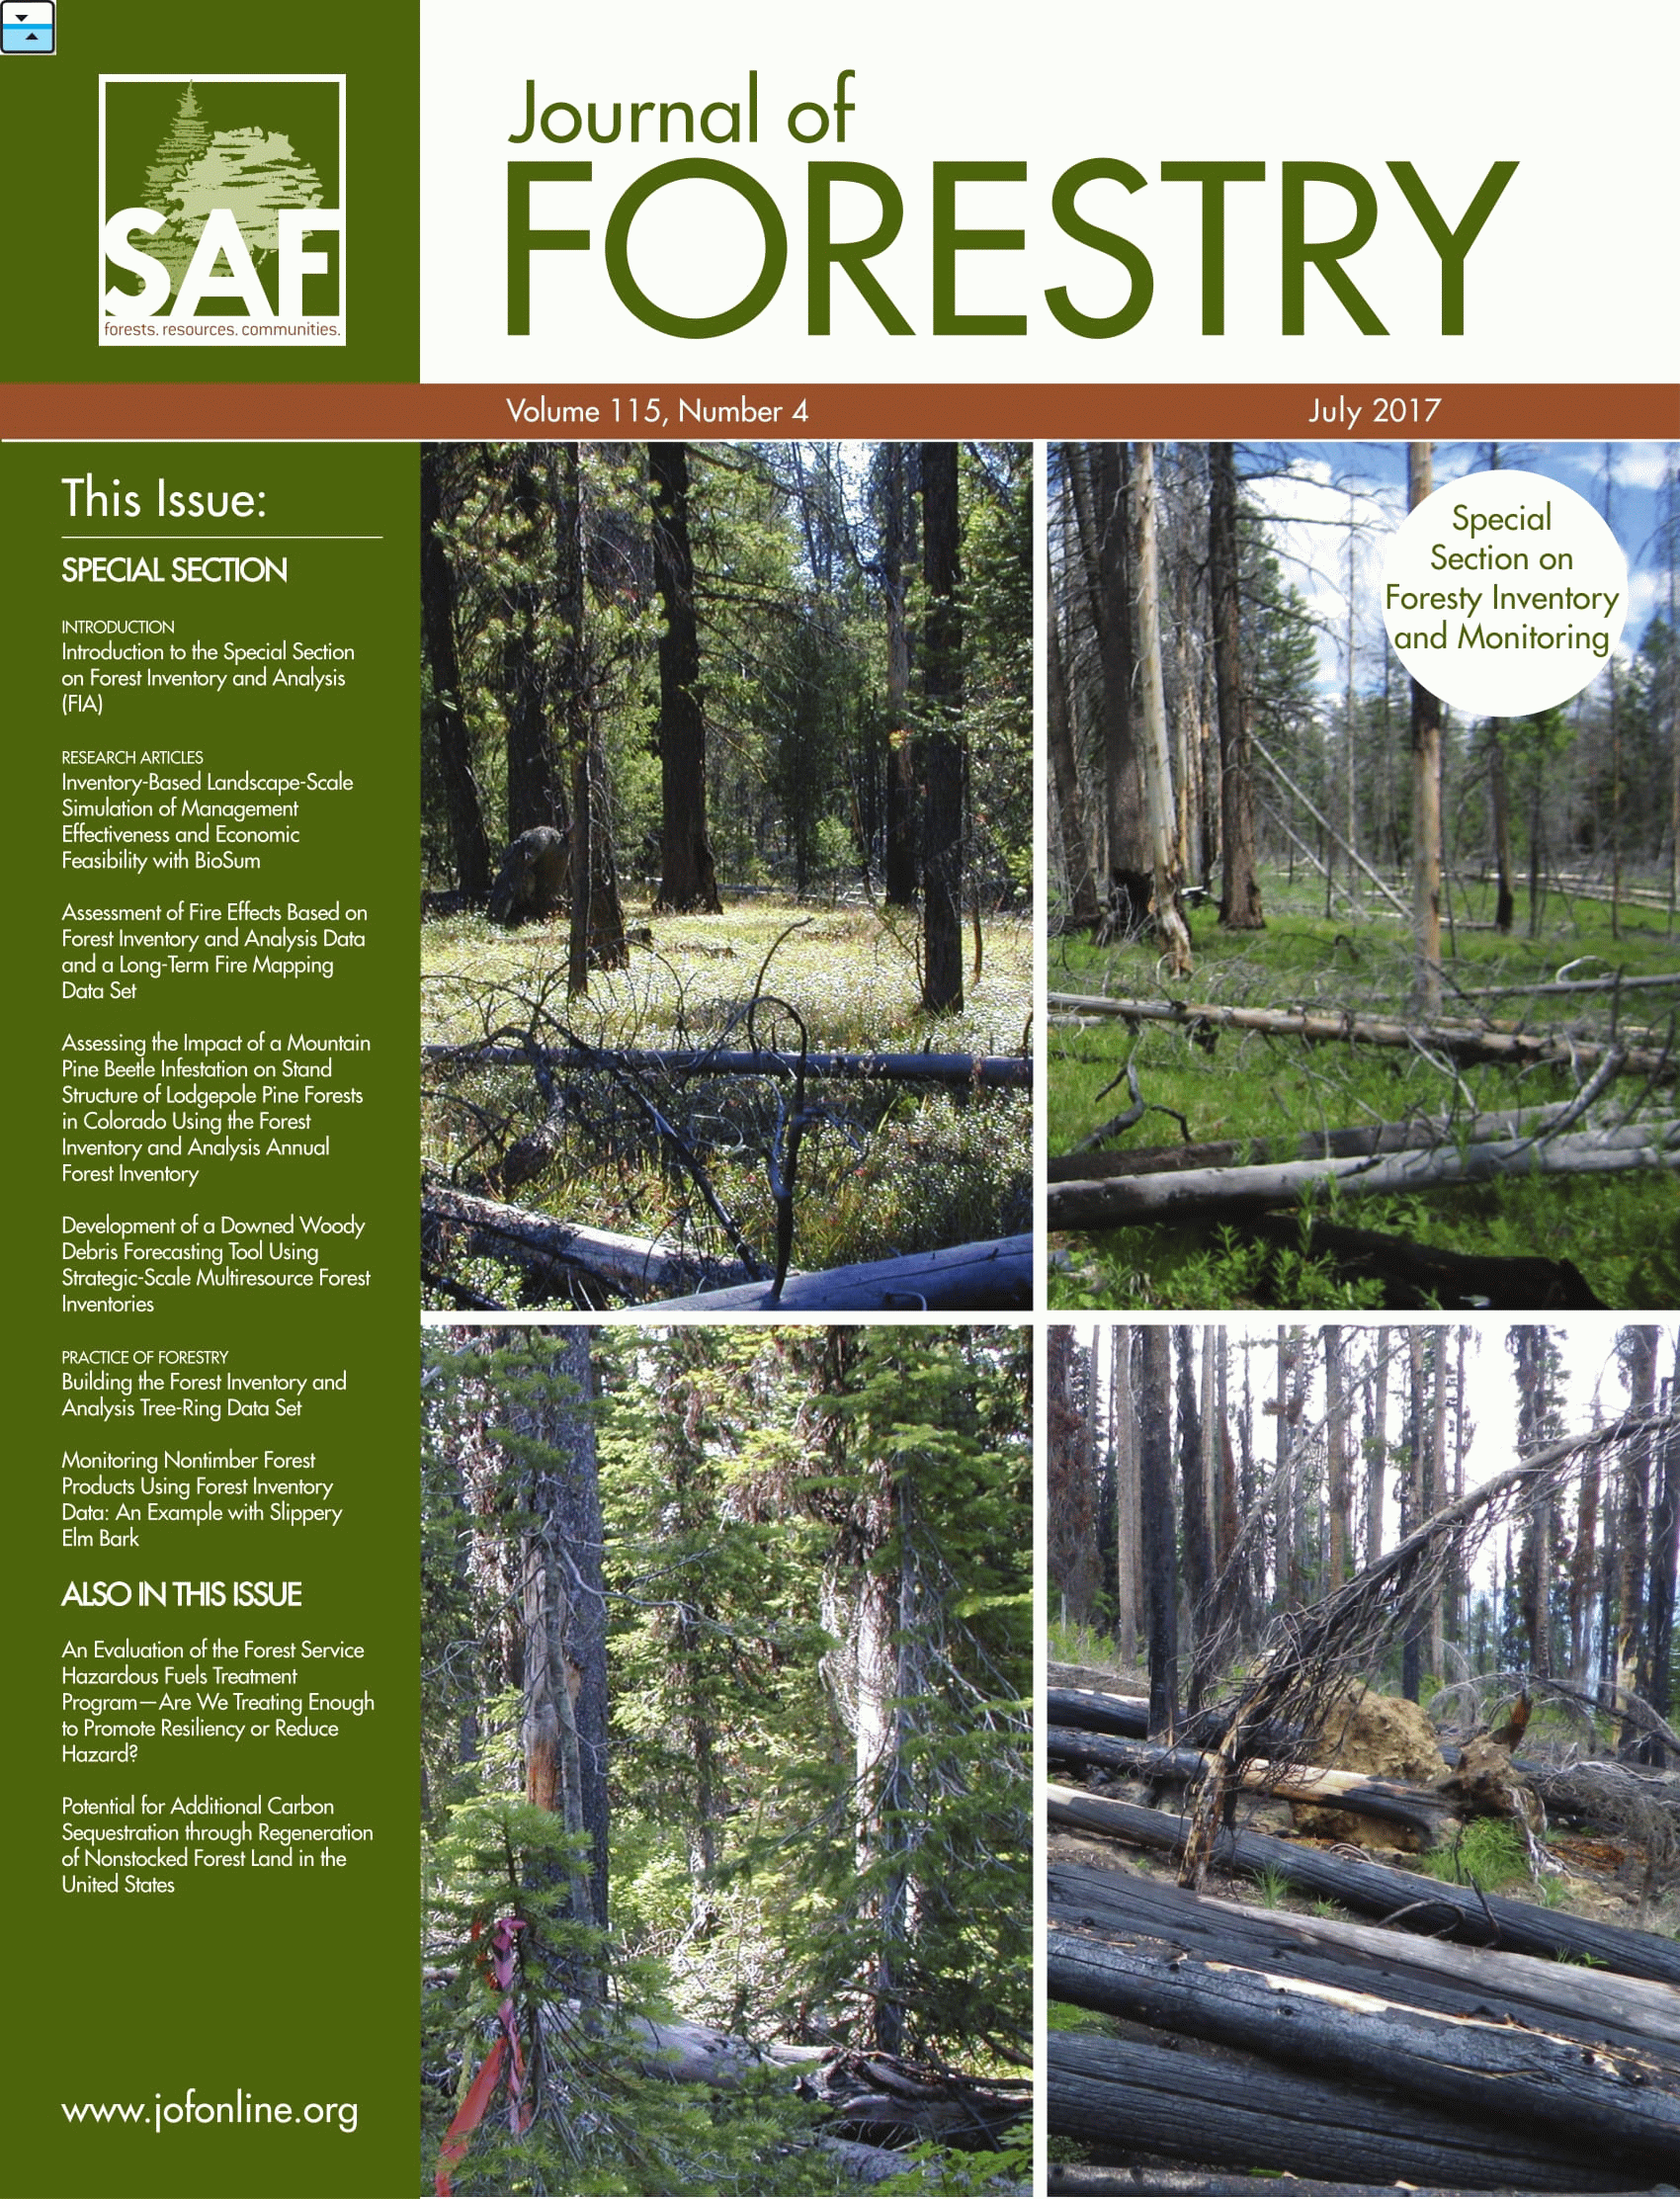 Forestry: An International Journal of Forest Research | Oxford Academic